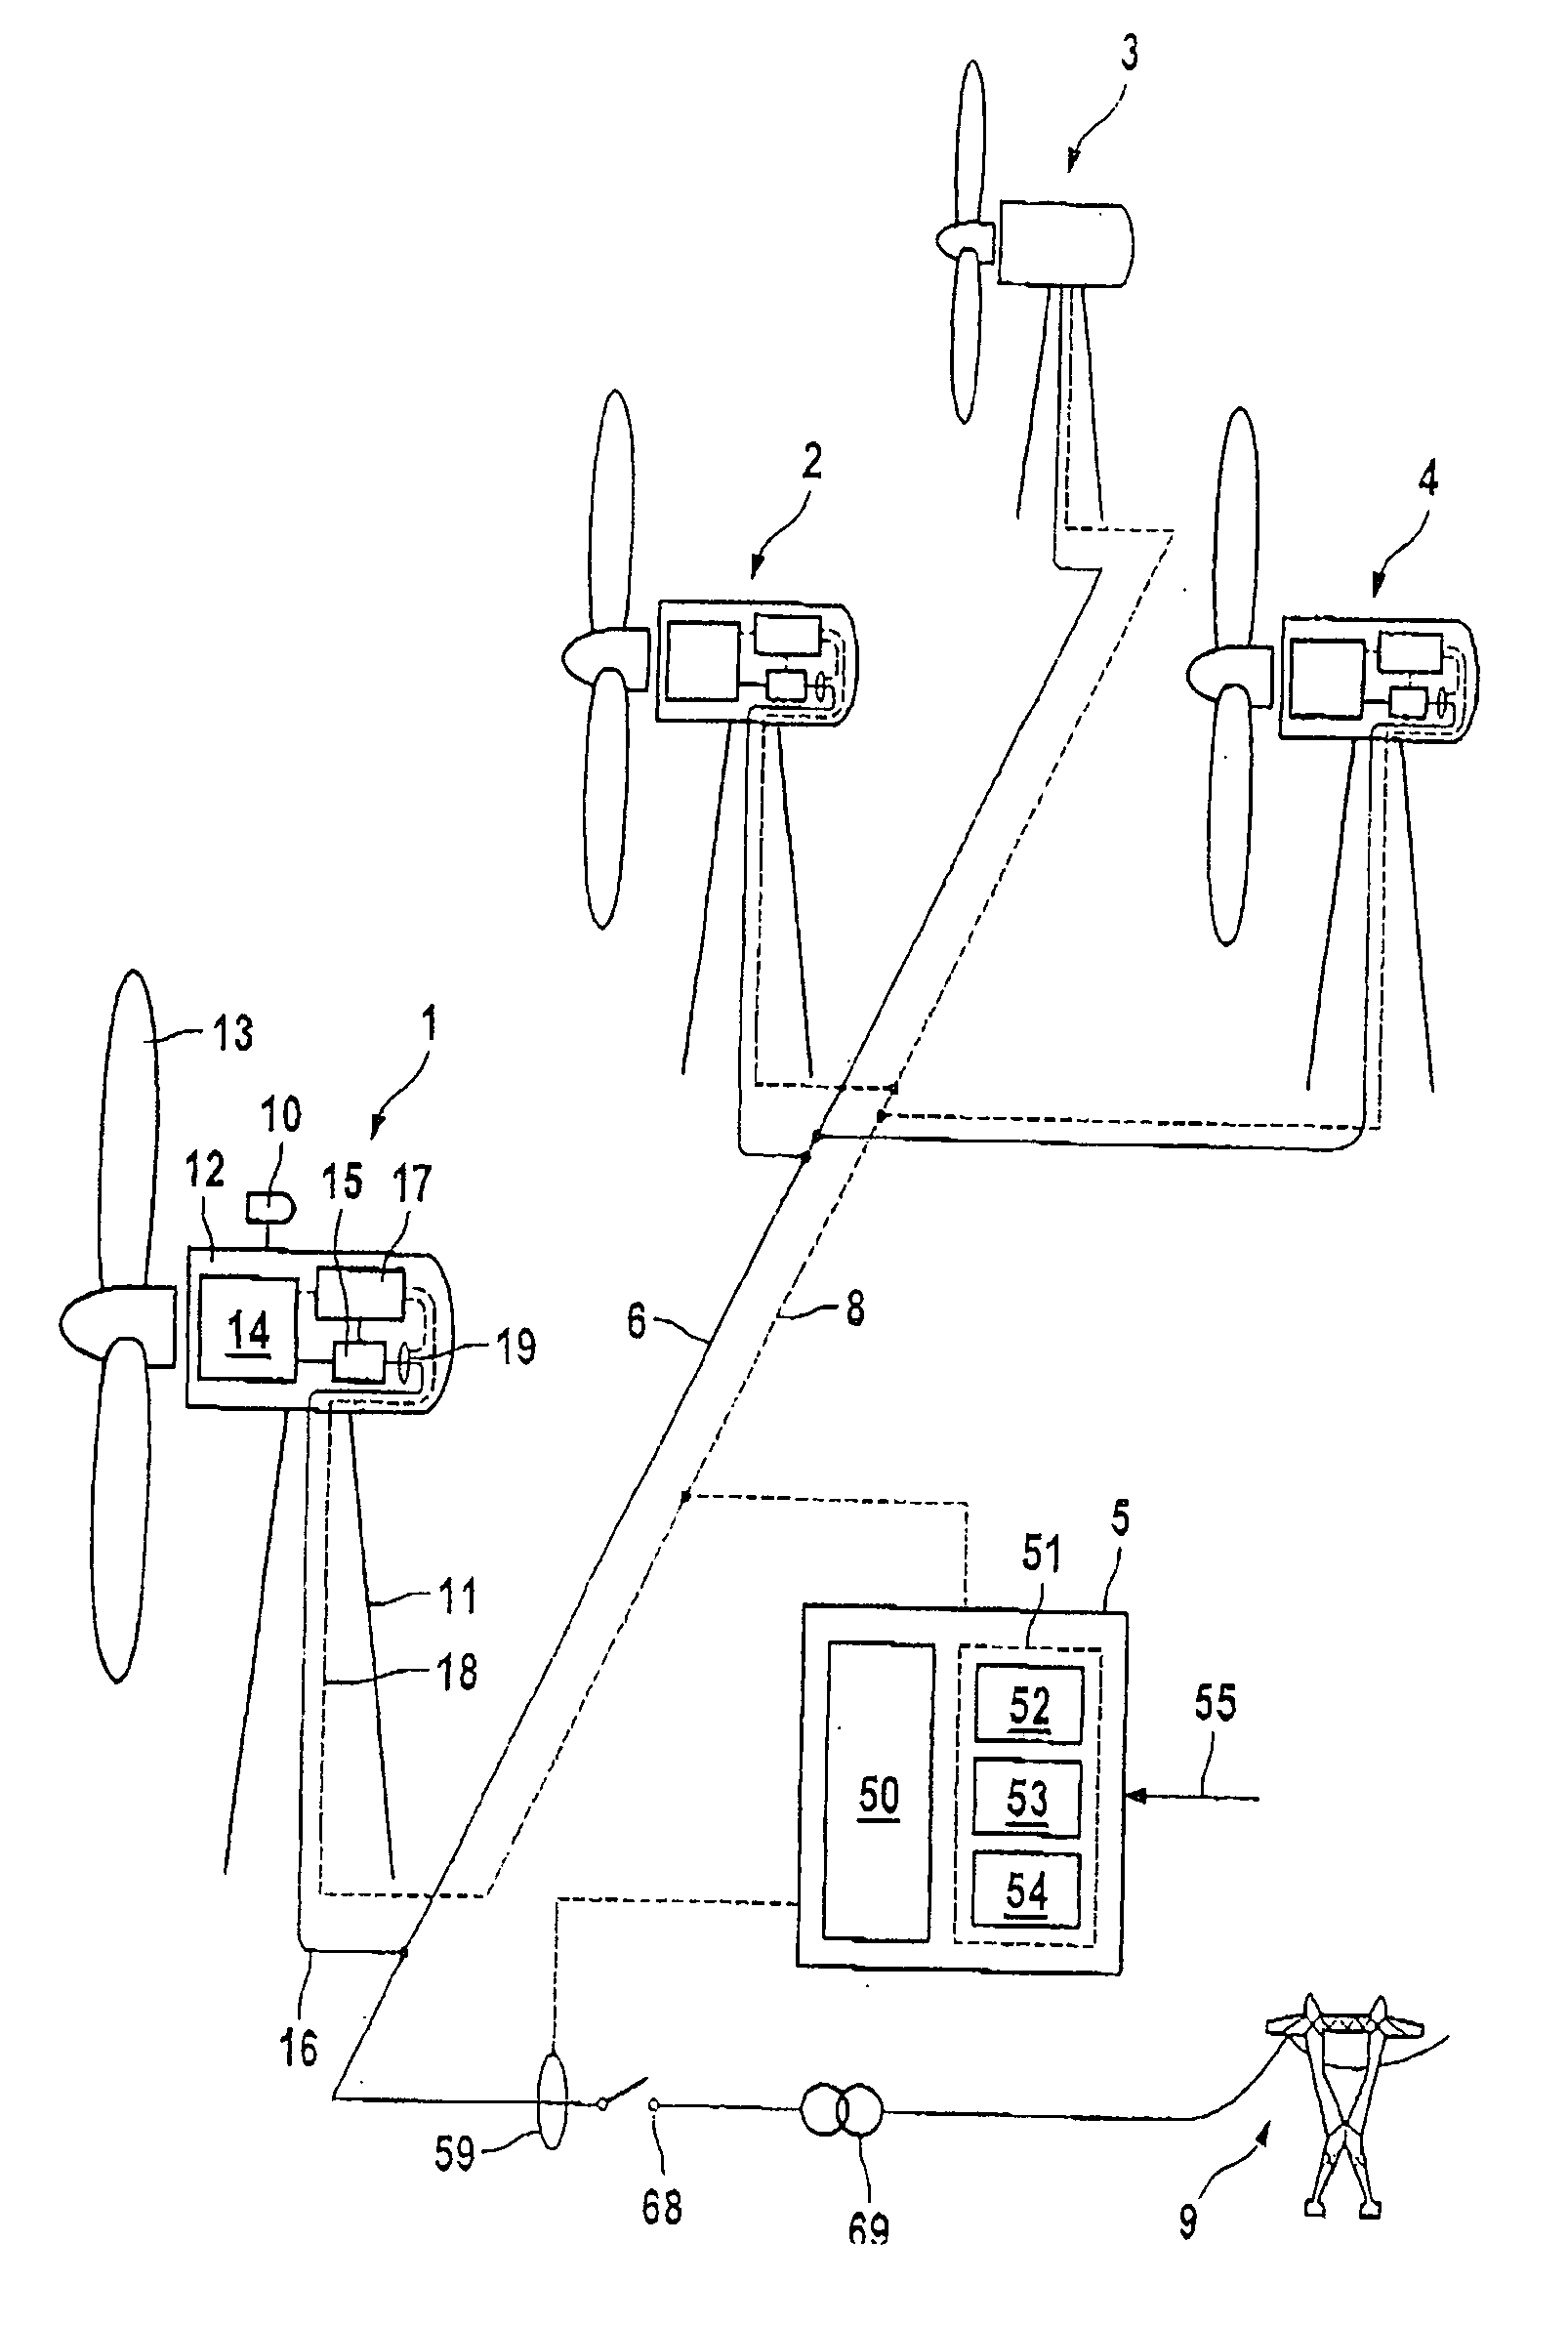 Method for Optimizing the Operation of Wind Farms